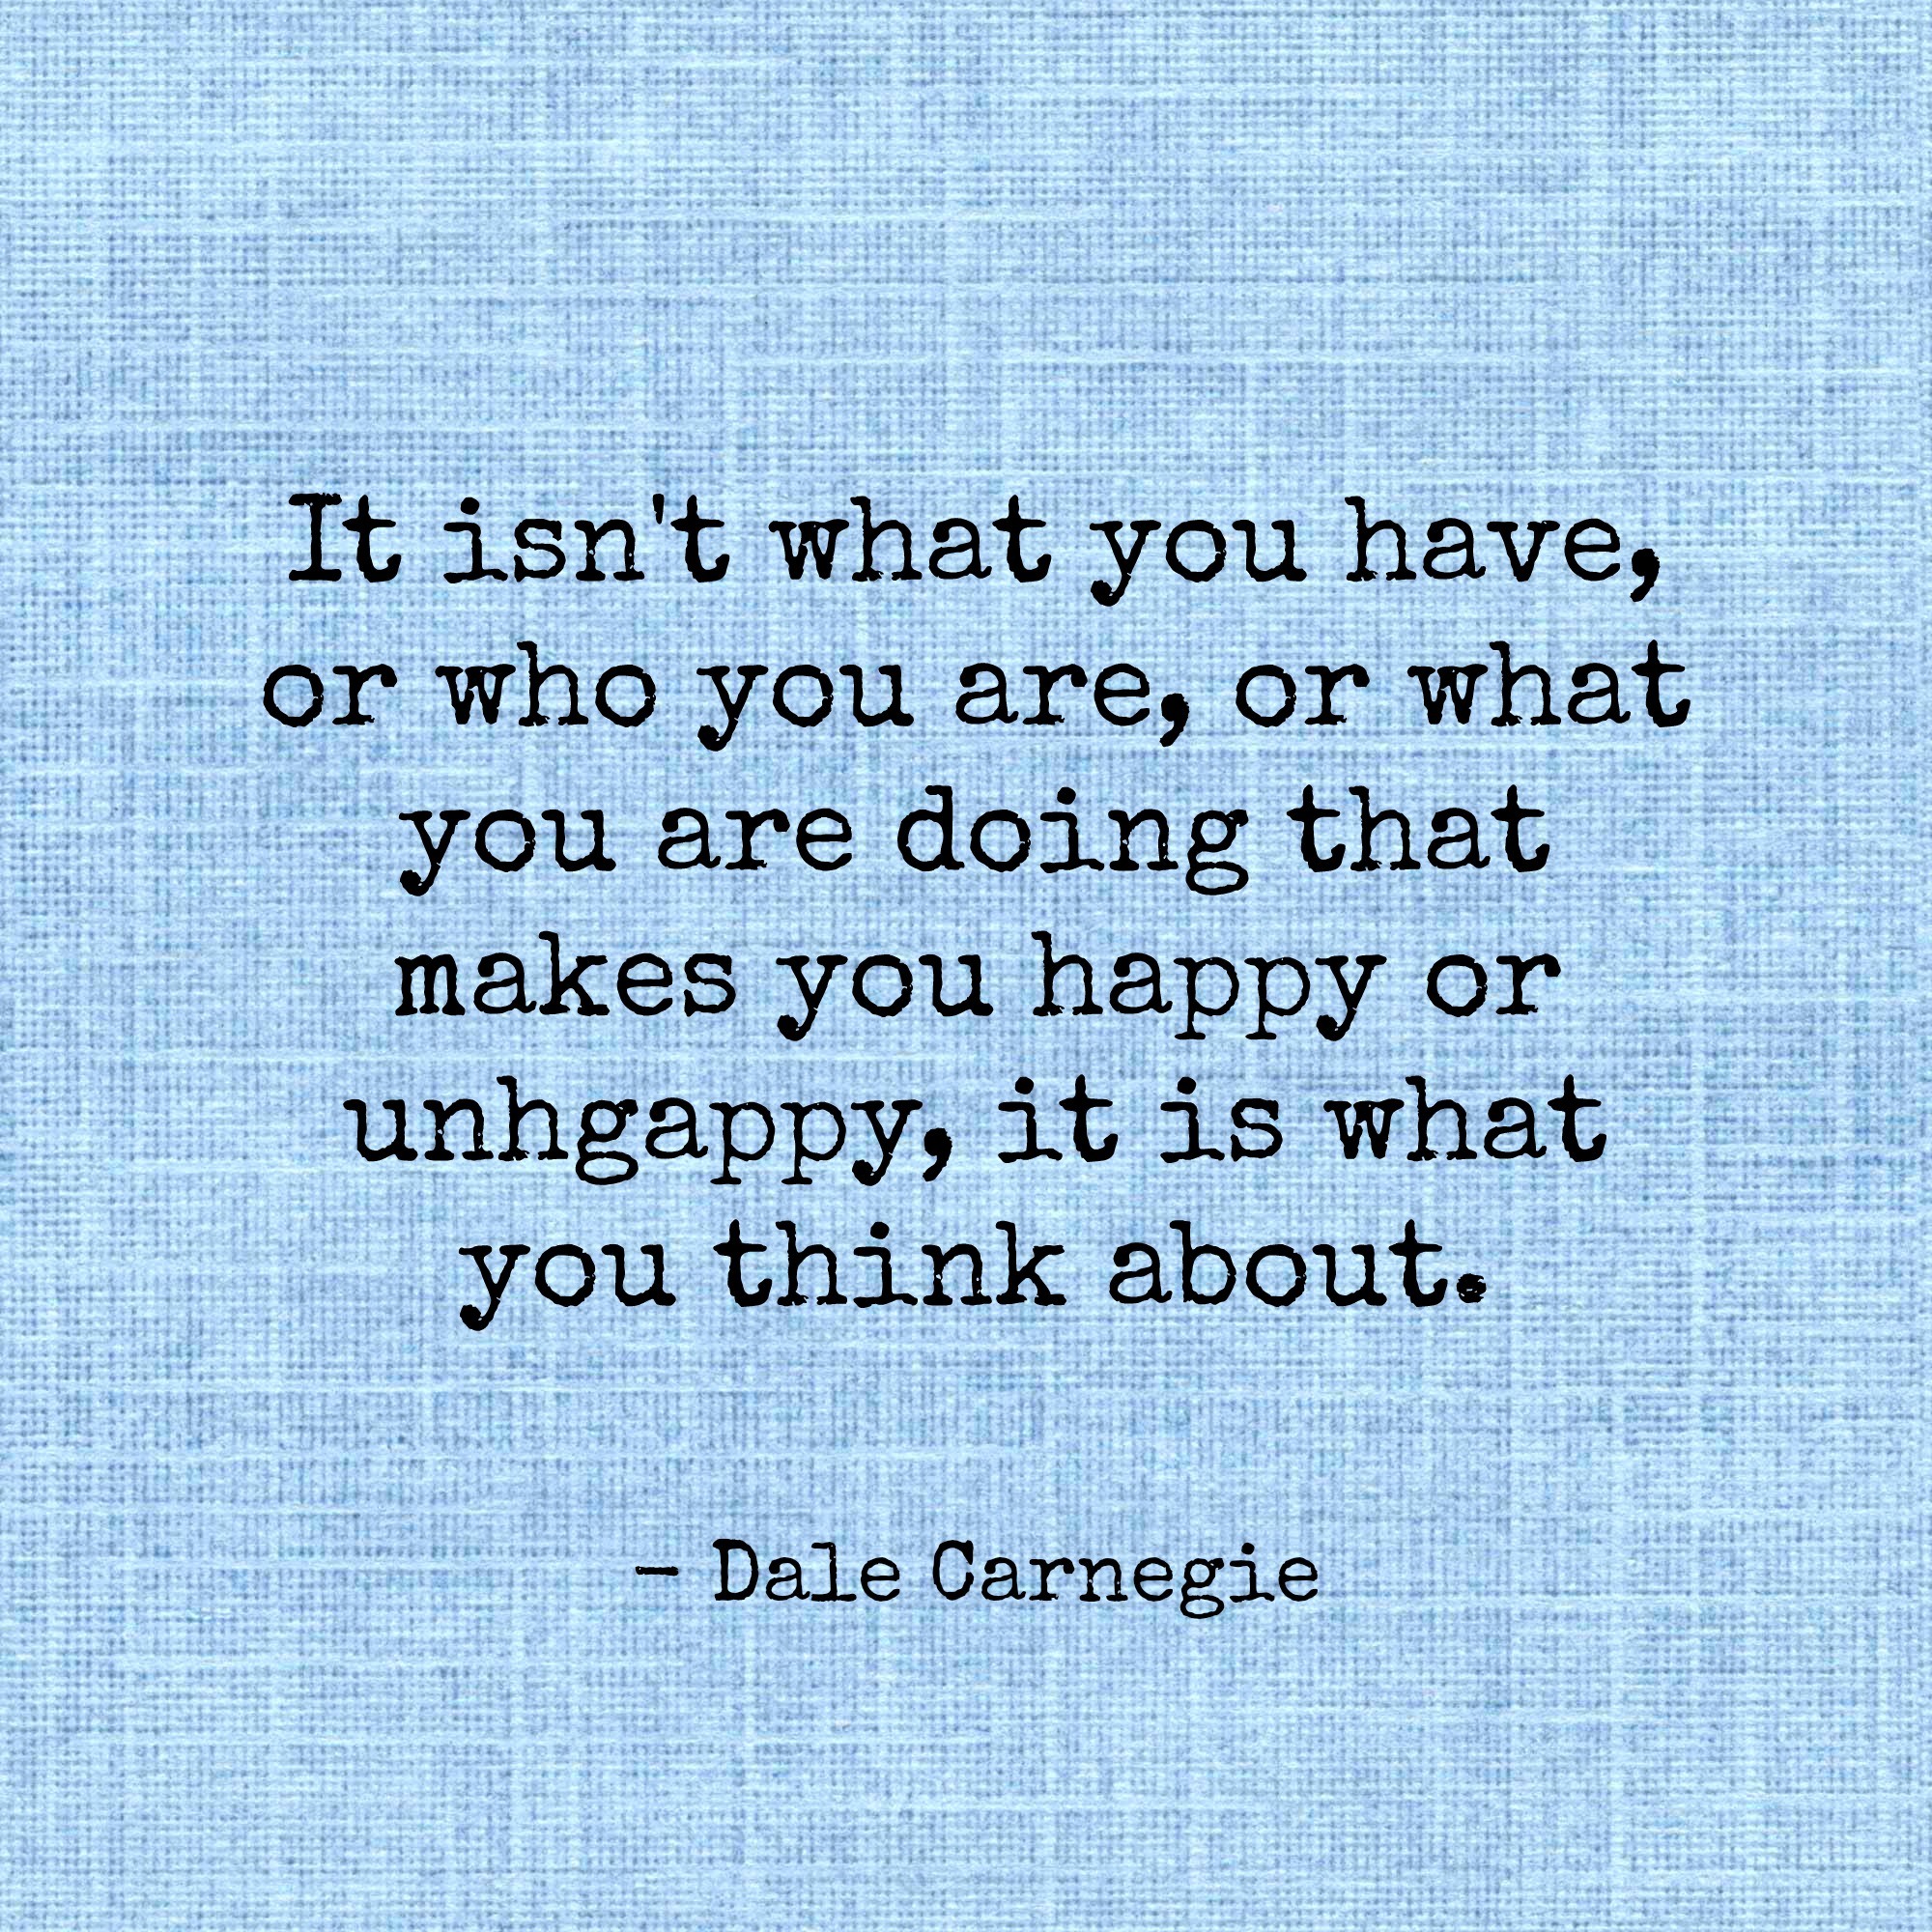 It isn't what you have or who you are or what you are doing that makes you happy or unhappy, it is what you think about.